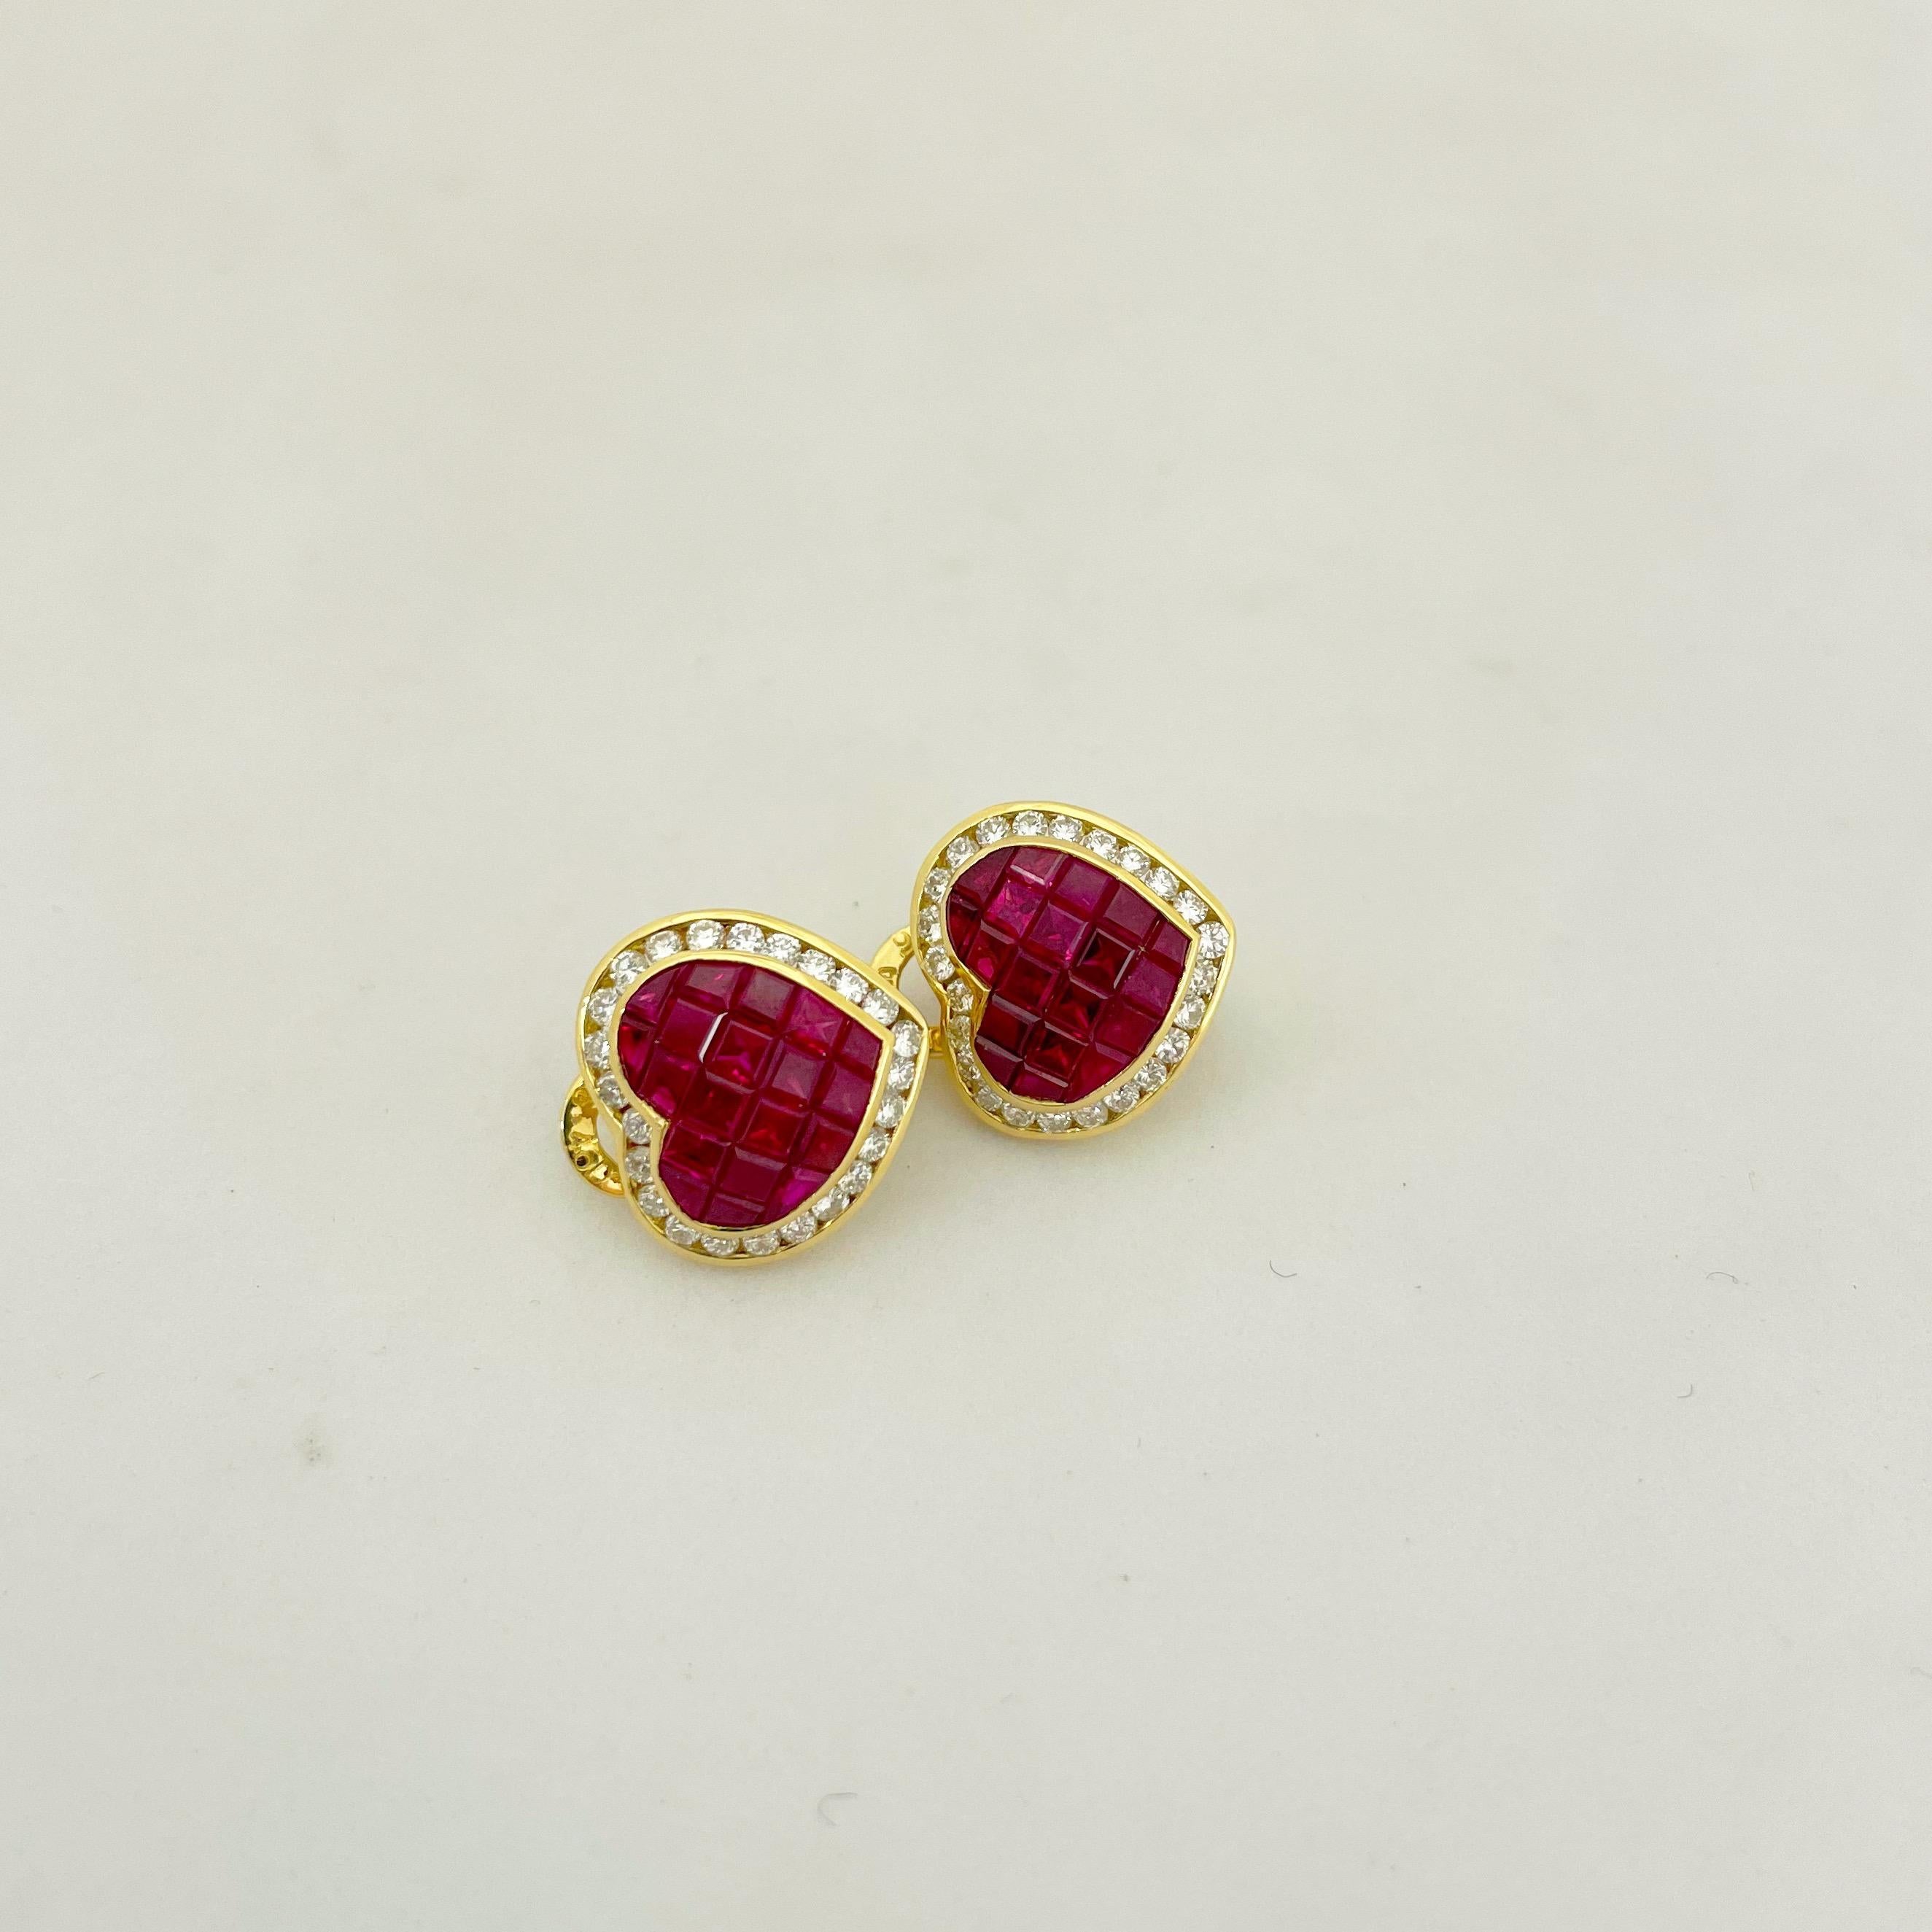 Cellini 18 karat yellow gold heart shaped earrings. These earrings are set with 5.20 carats of square cut rubies which have been invisibly set. A yellow gold bezel set with 1.30 carats of round brilliant diamonds frame the rubies in these beautiful